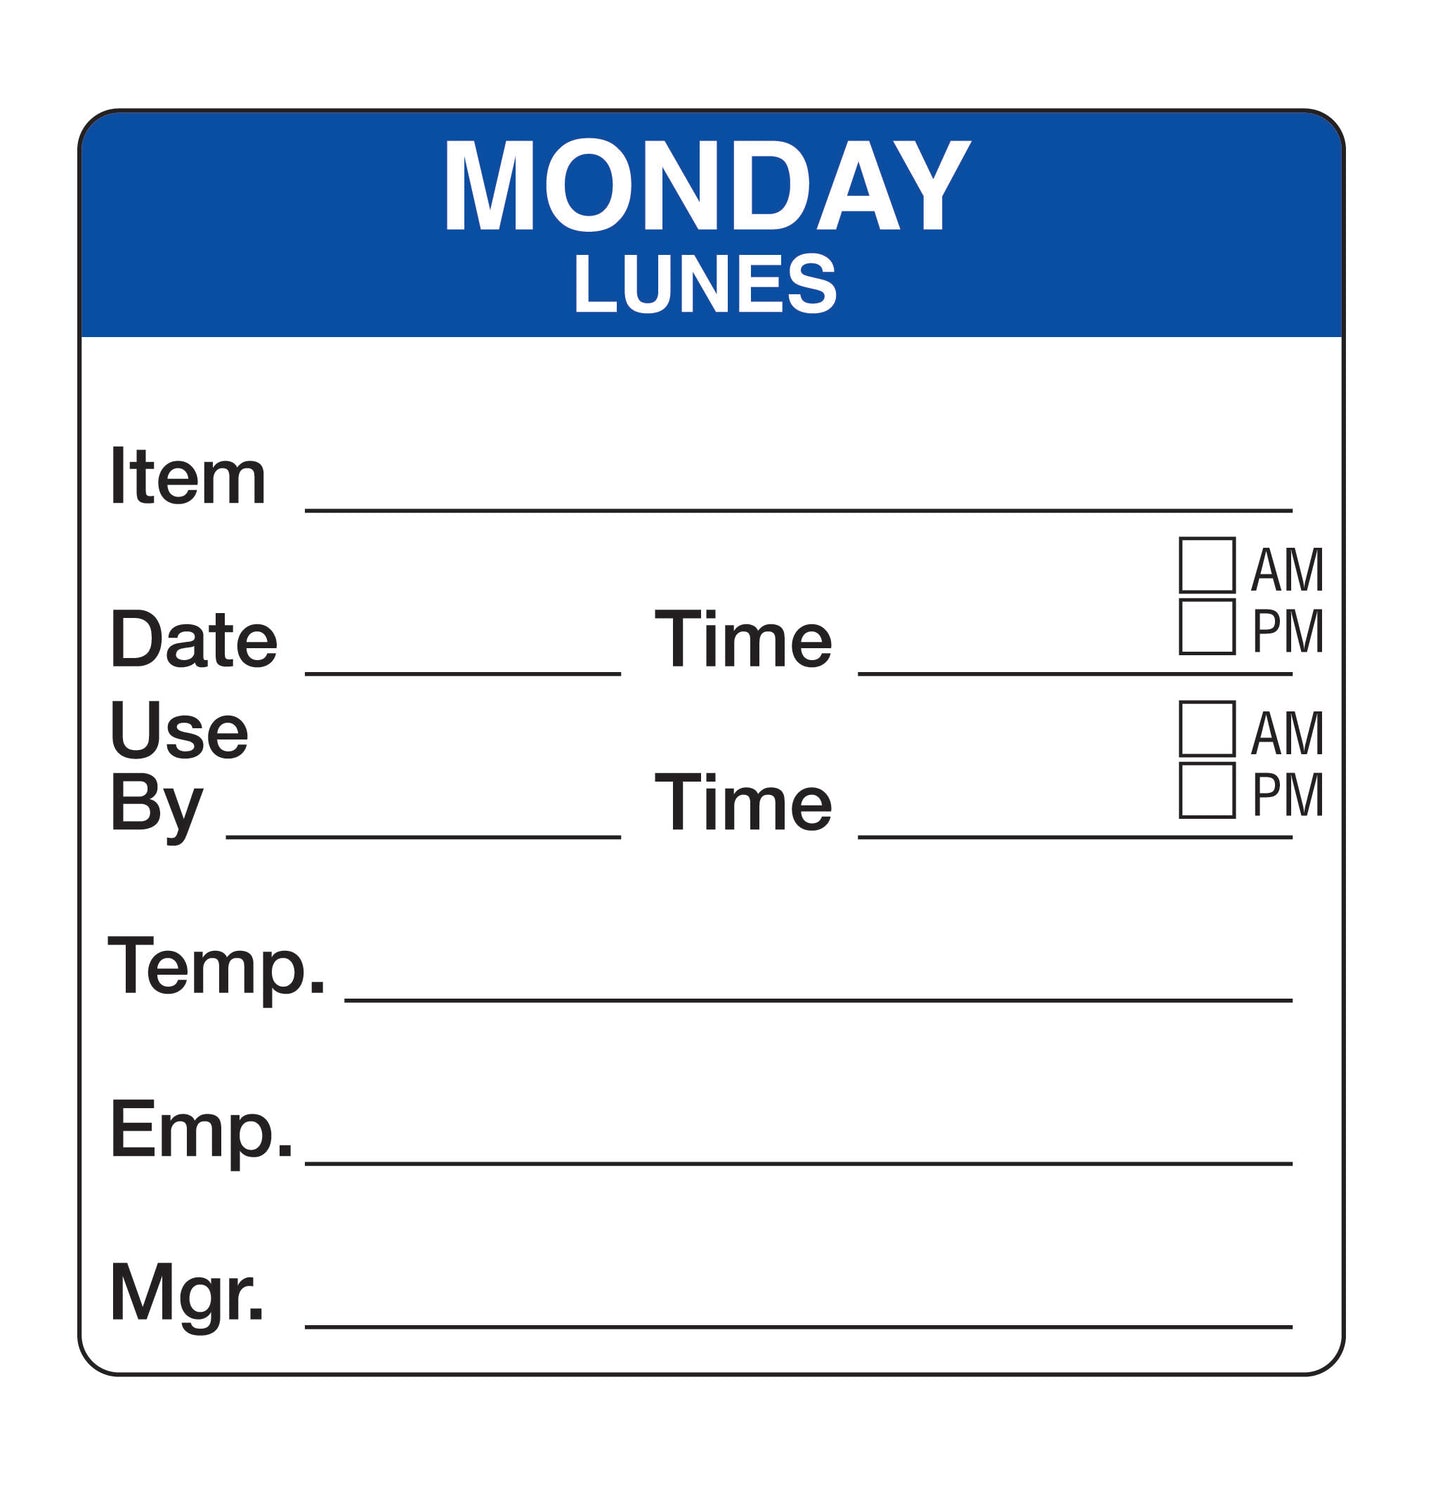 Monday - Lunes 2" x 2" Removable Day of the Week Prep Date Label